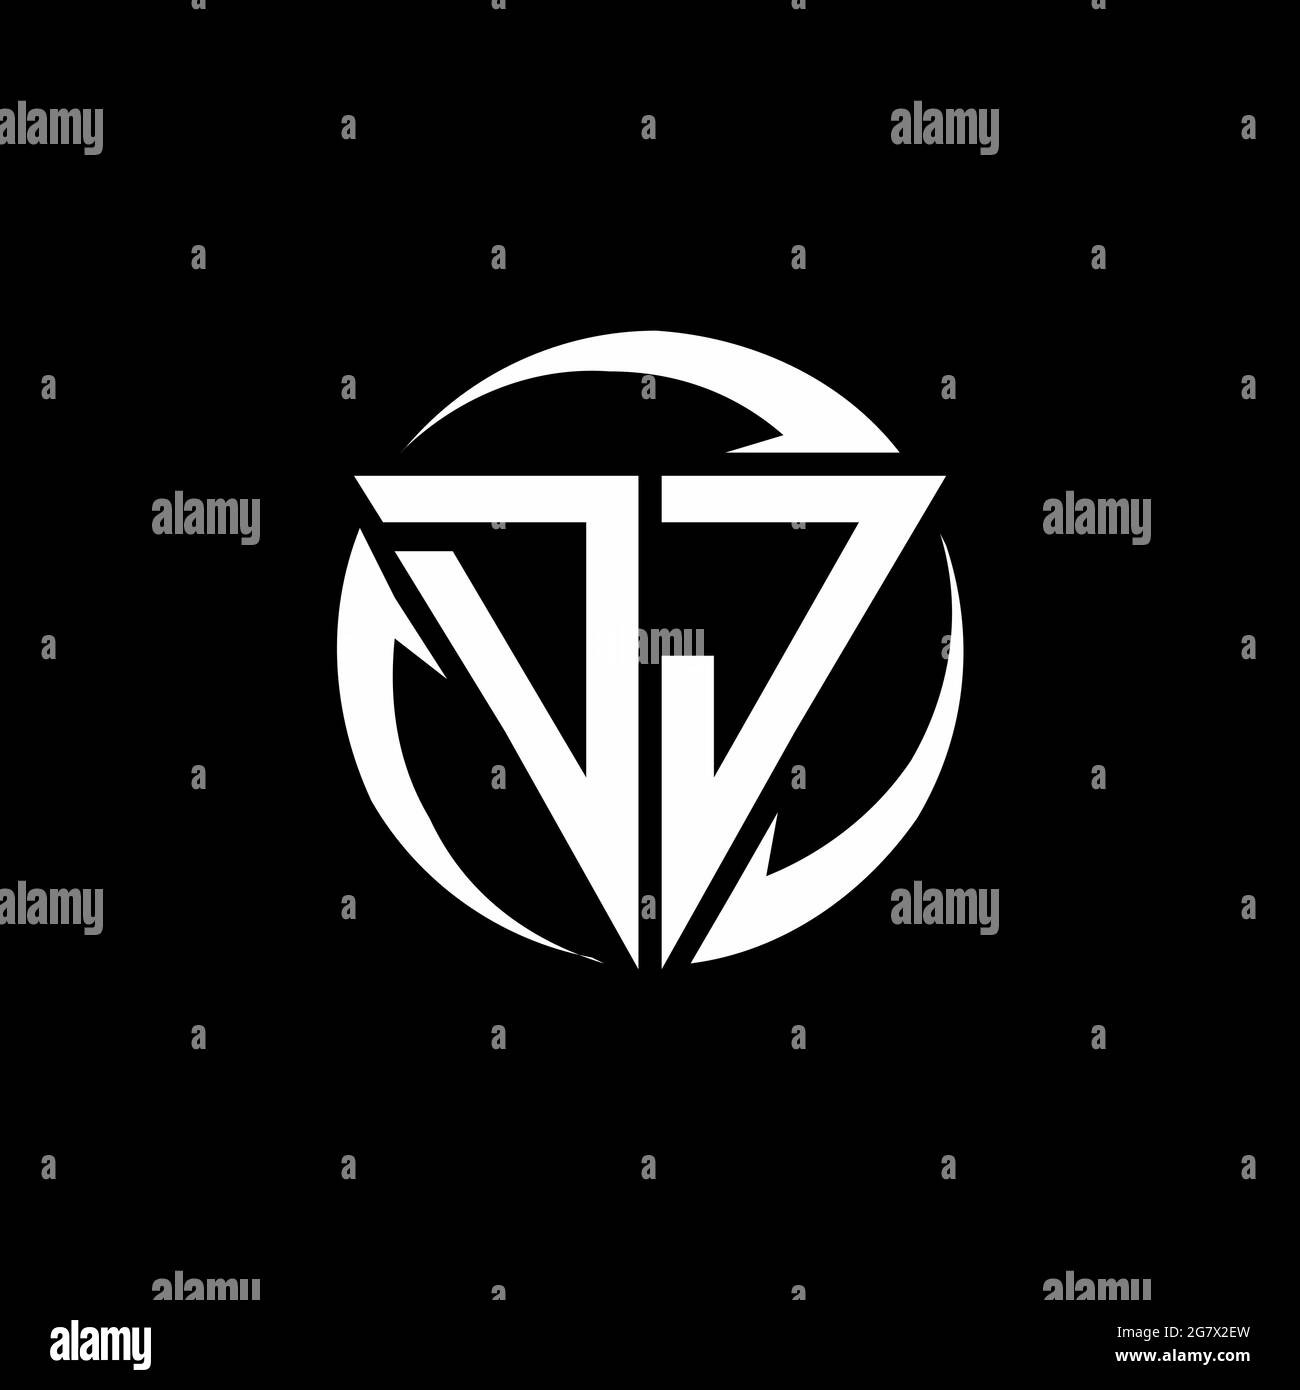 DJ logo with triangle shape and circle rounded design template isolated on black background Stock Vector